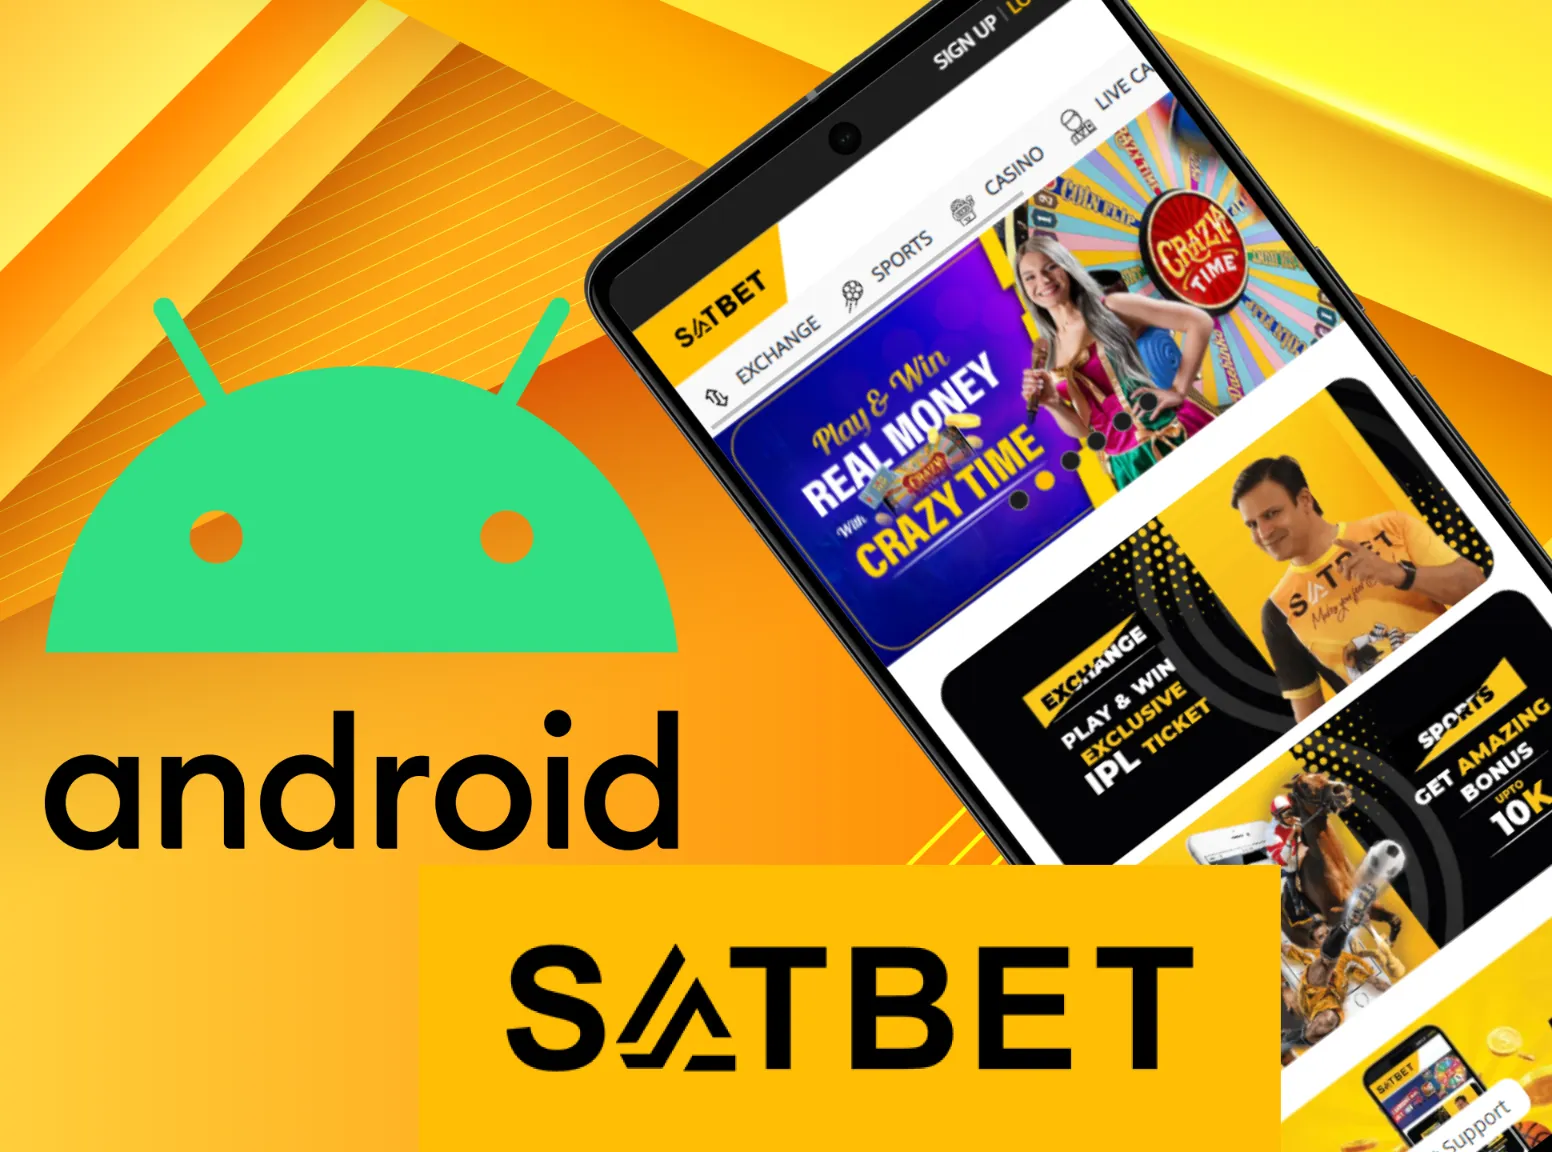 Download Satbet Android app on your device.